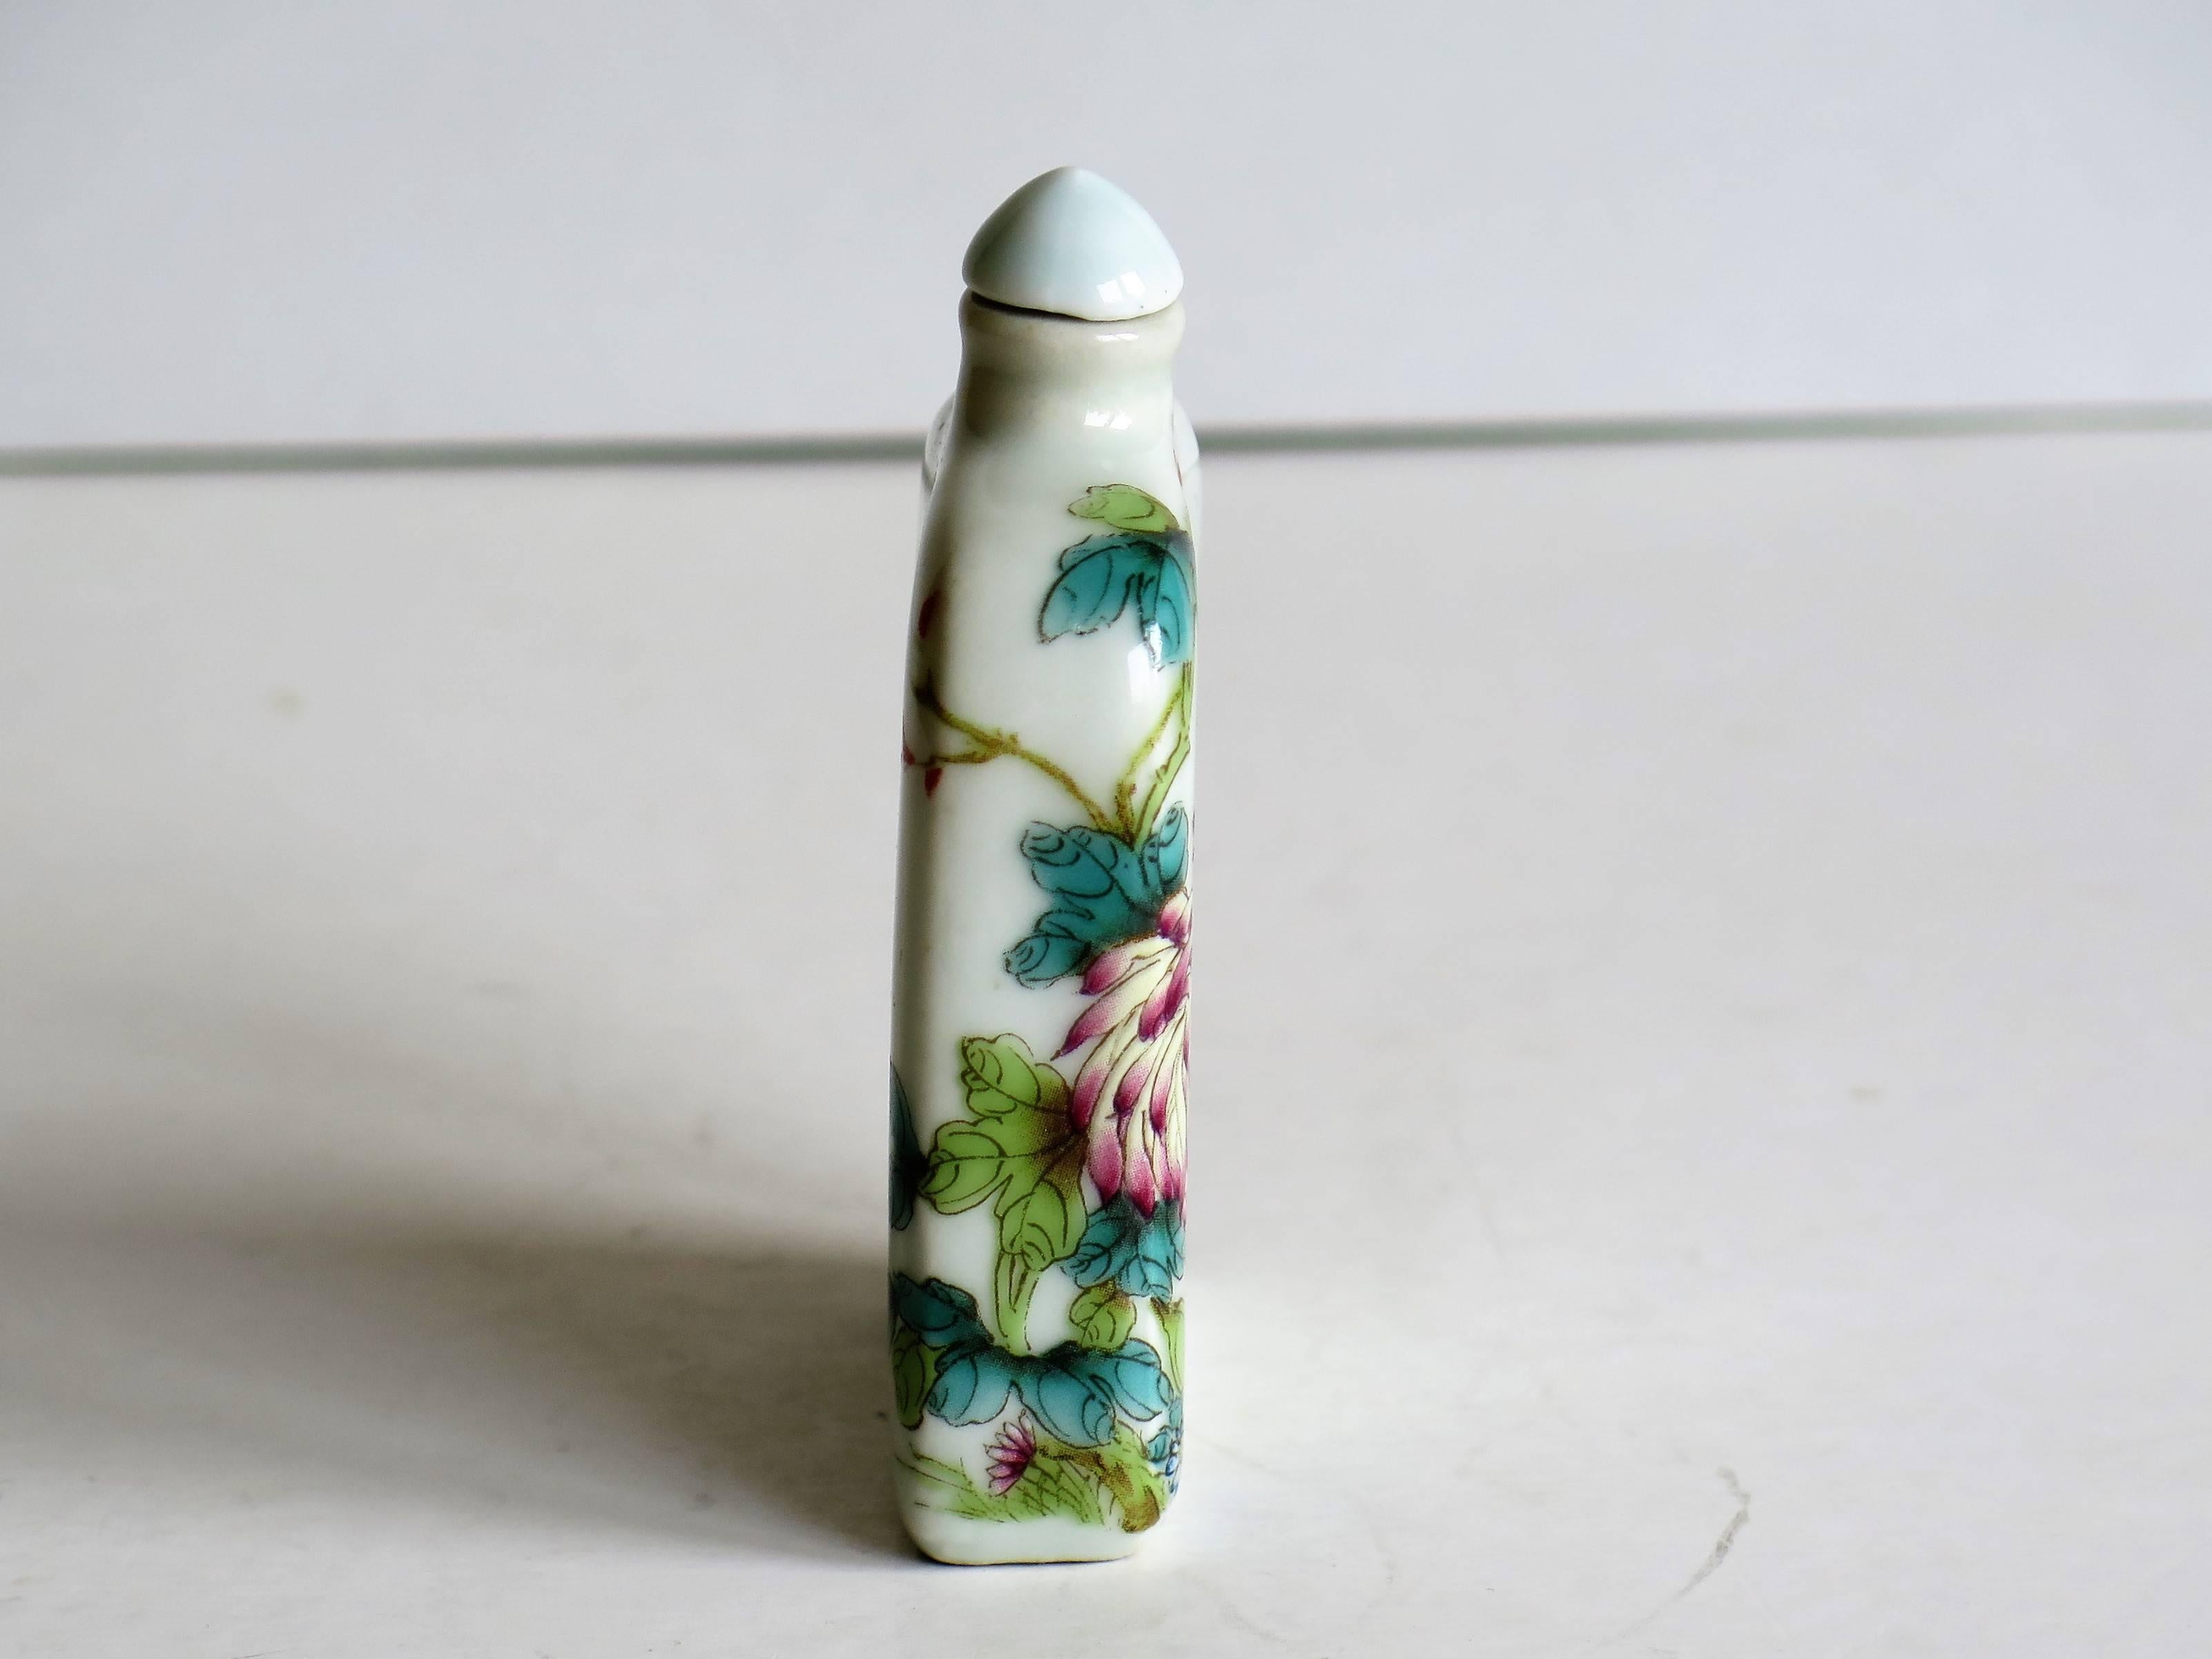 20th Century Chinese Porcelain Snuff Bottle Hand-Painted Birds and Flowers, Circa 1940s